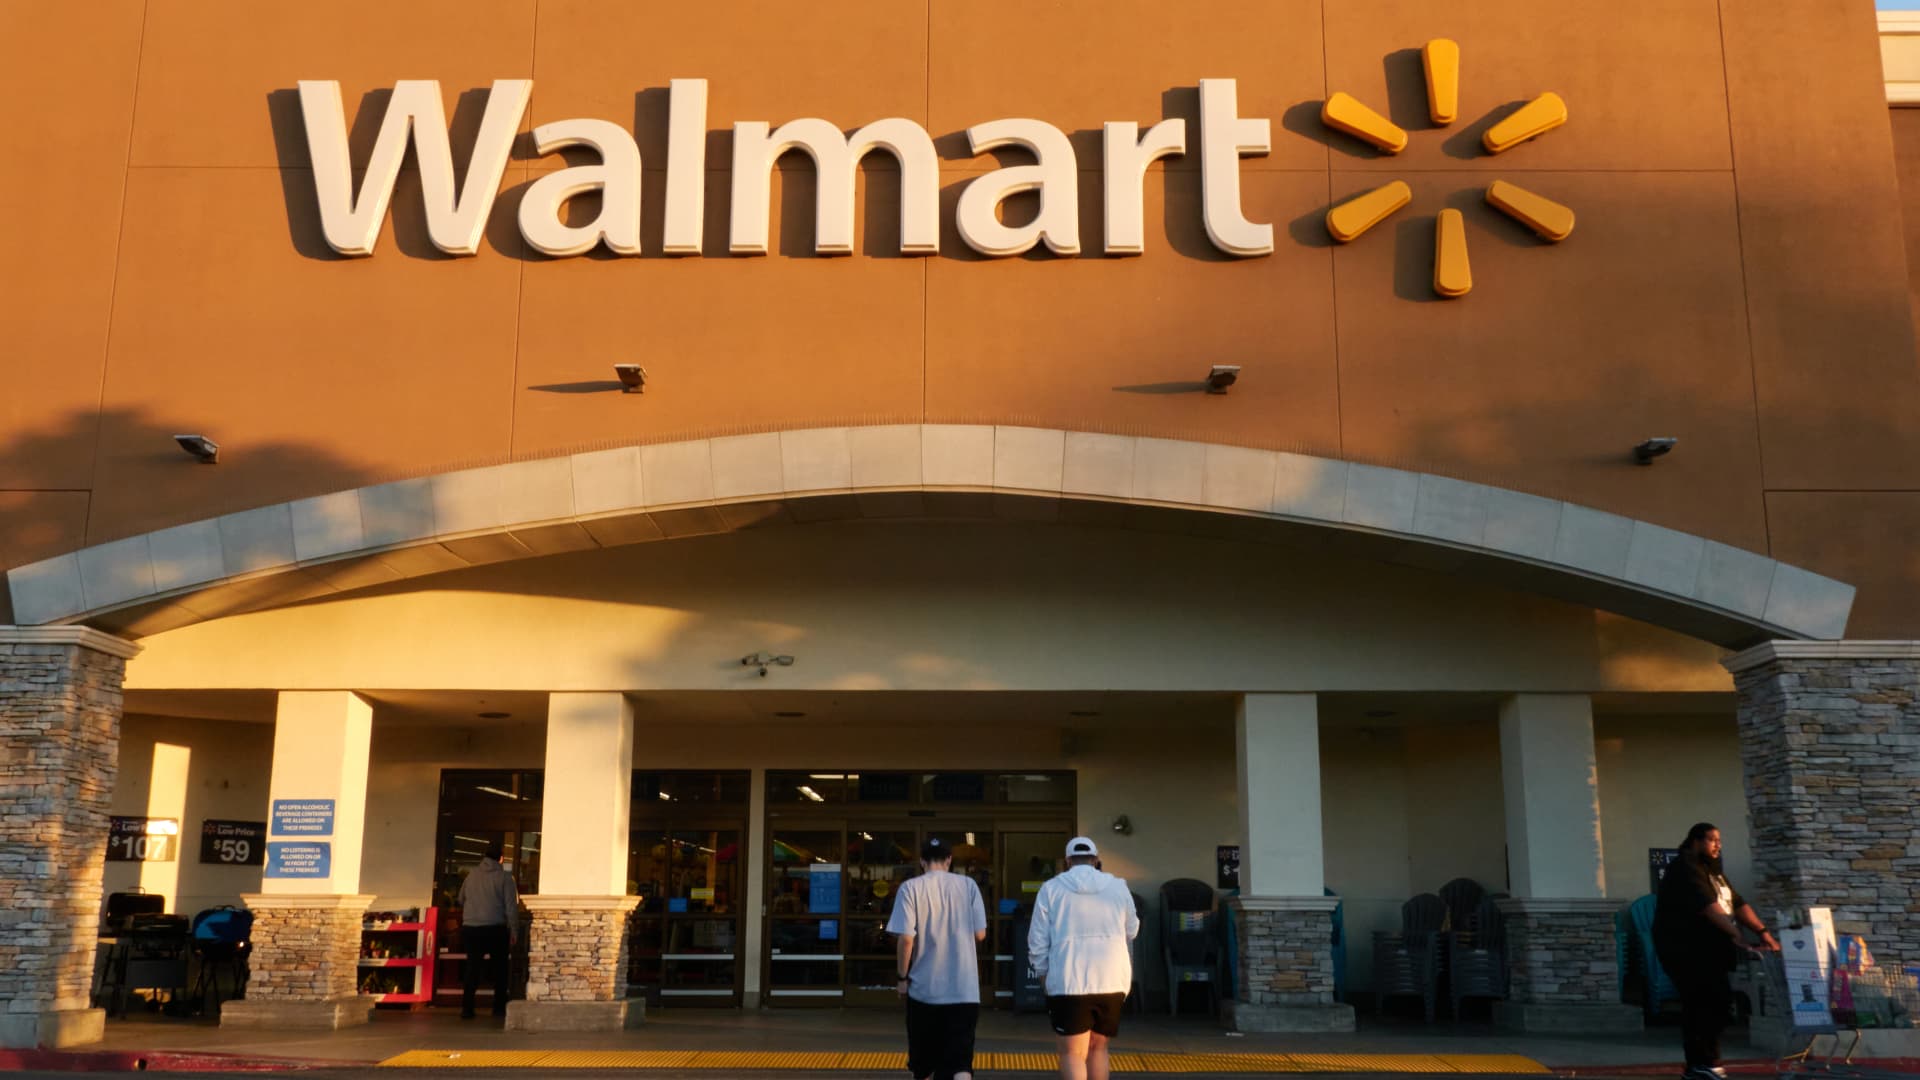 Walmart expands abortion coverage for its employees in the wake of Roe v Wade de..